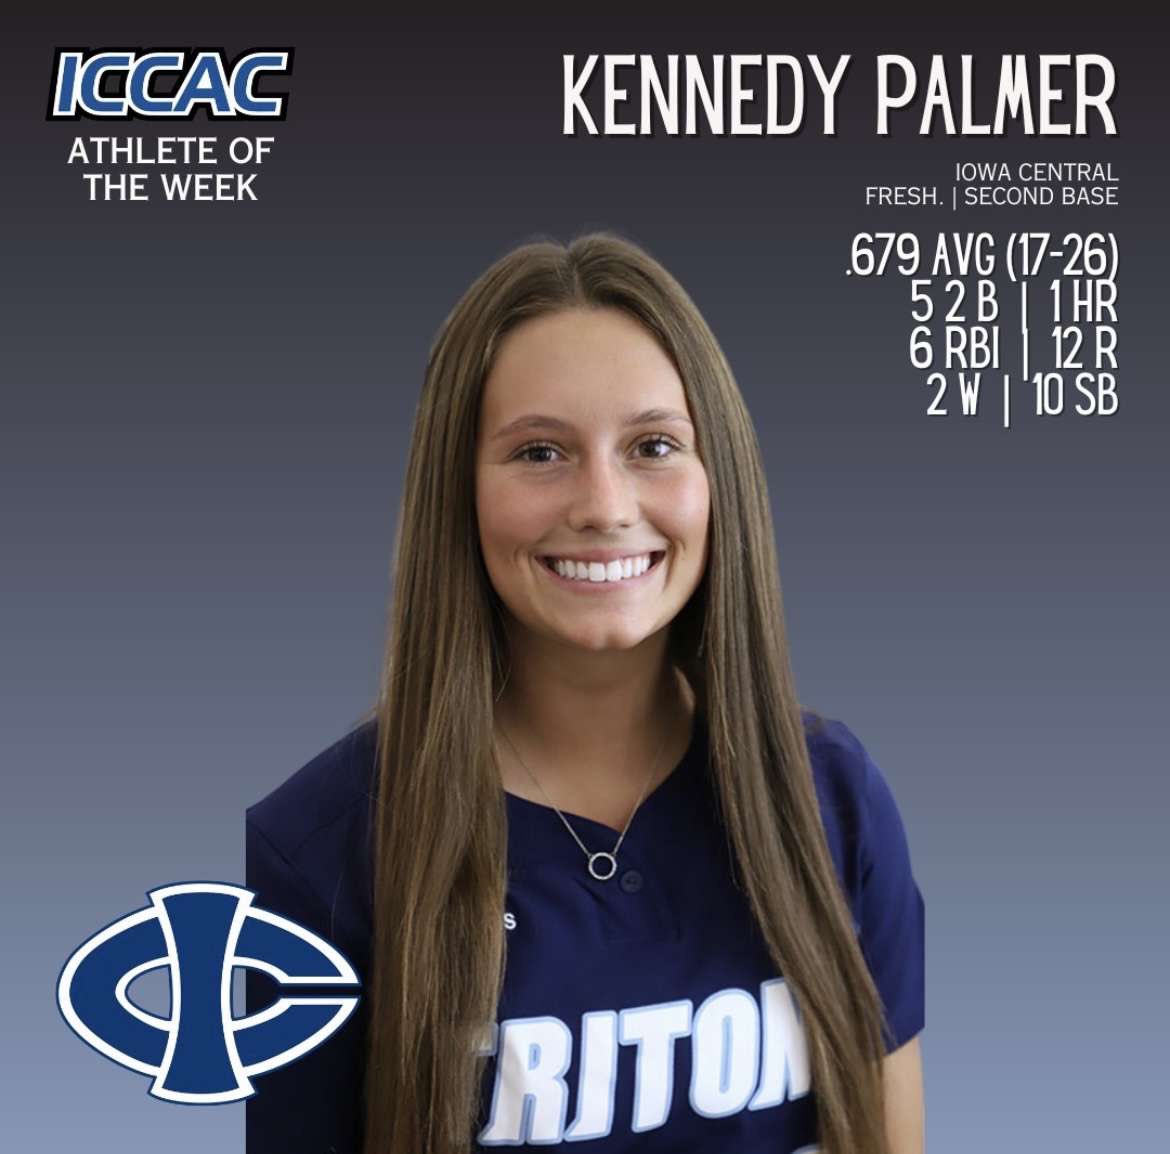 Congratulations 𝑲𝒆𝒏𝒏𝒆𝒅𝒚 𝑷𝒂𝒍𝒎𝒆𝒓! Awarded her 2nd ICCAC ATHLETE OF THE WEEK! So proud of you Ken! Keep up the hard work! 🔱 #TritonPride #tritonexcellence